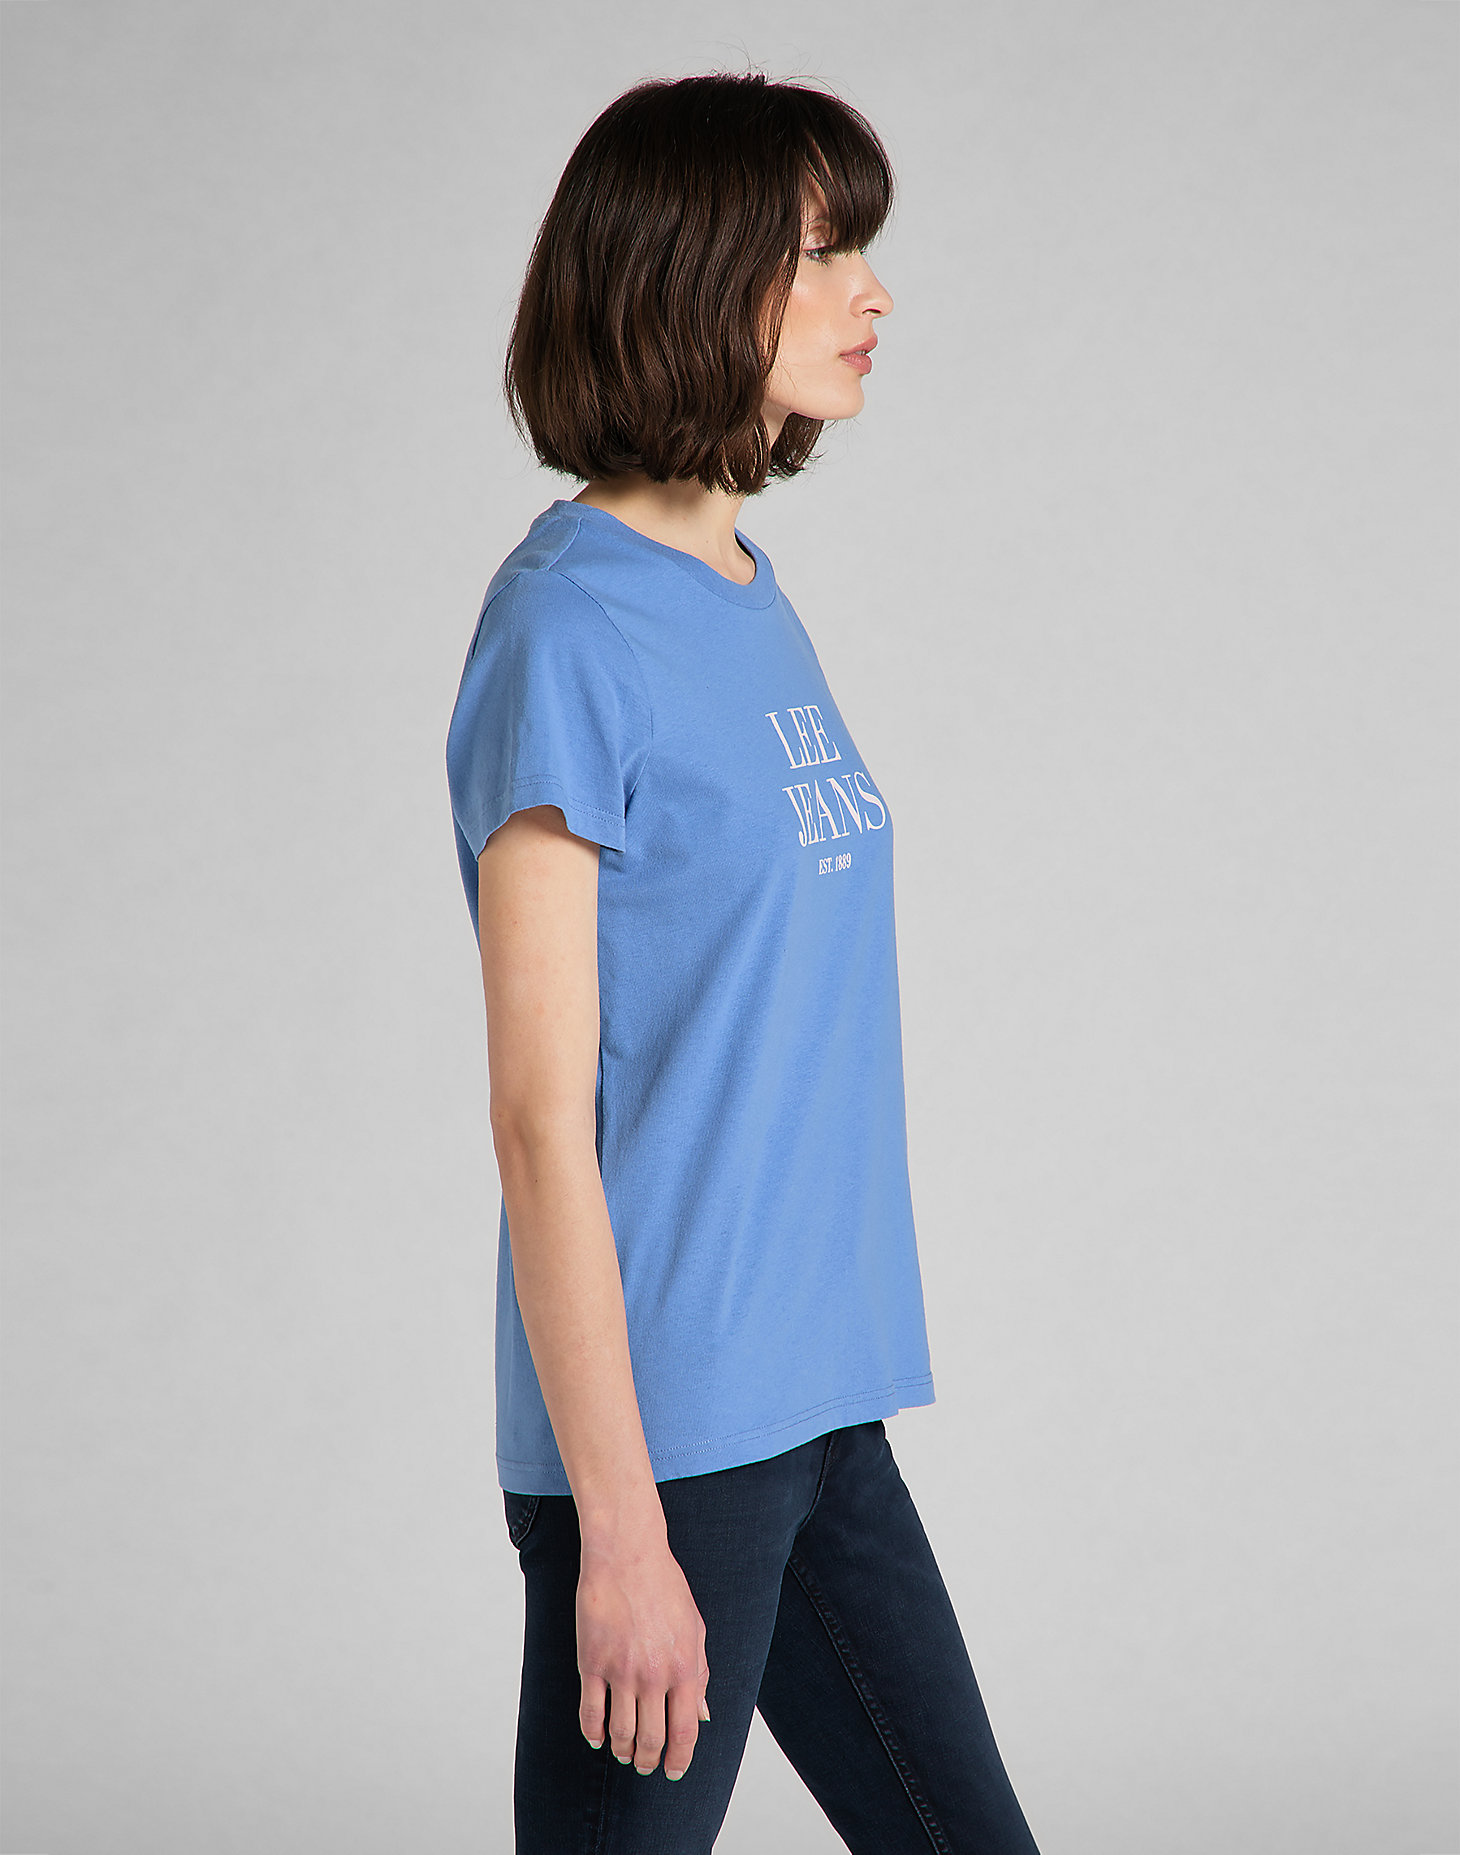 Graphic Tee in Blue Yonder alternative view 3